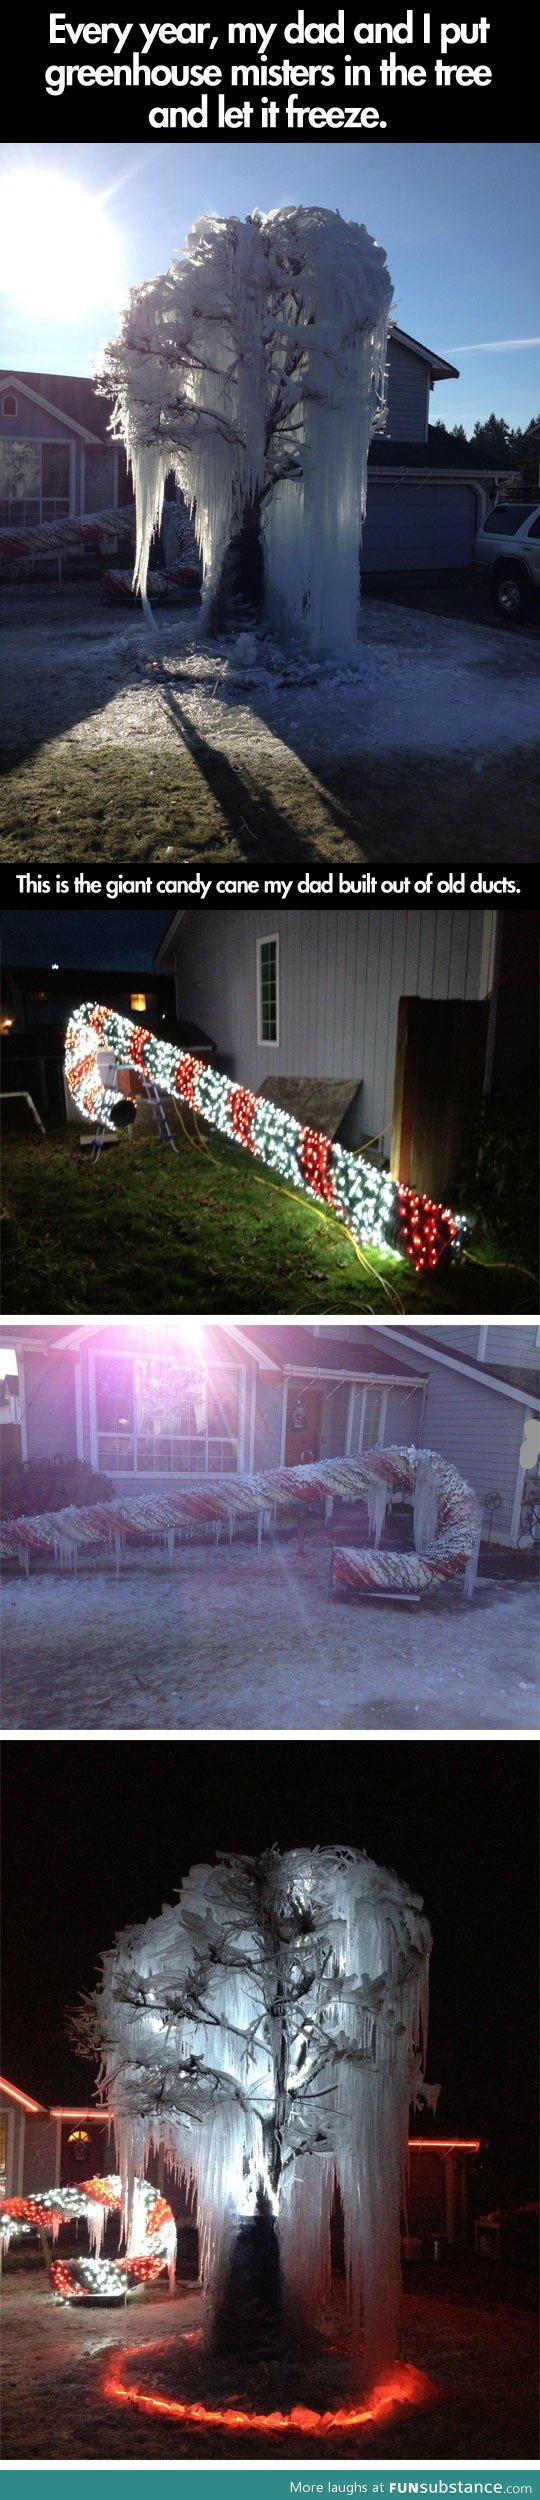 Awesome decoration for Christmas